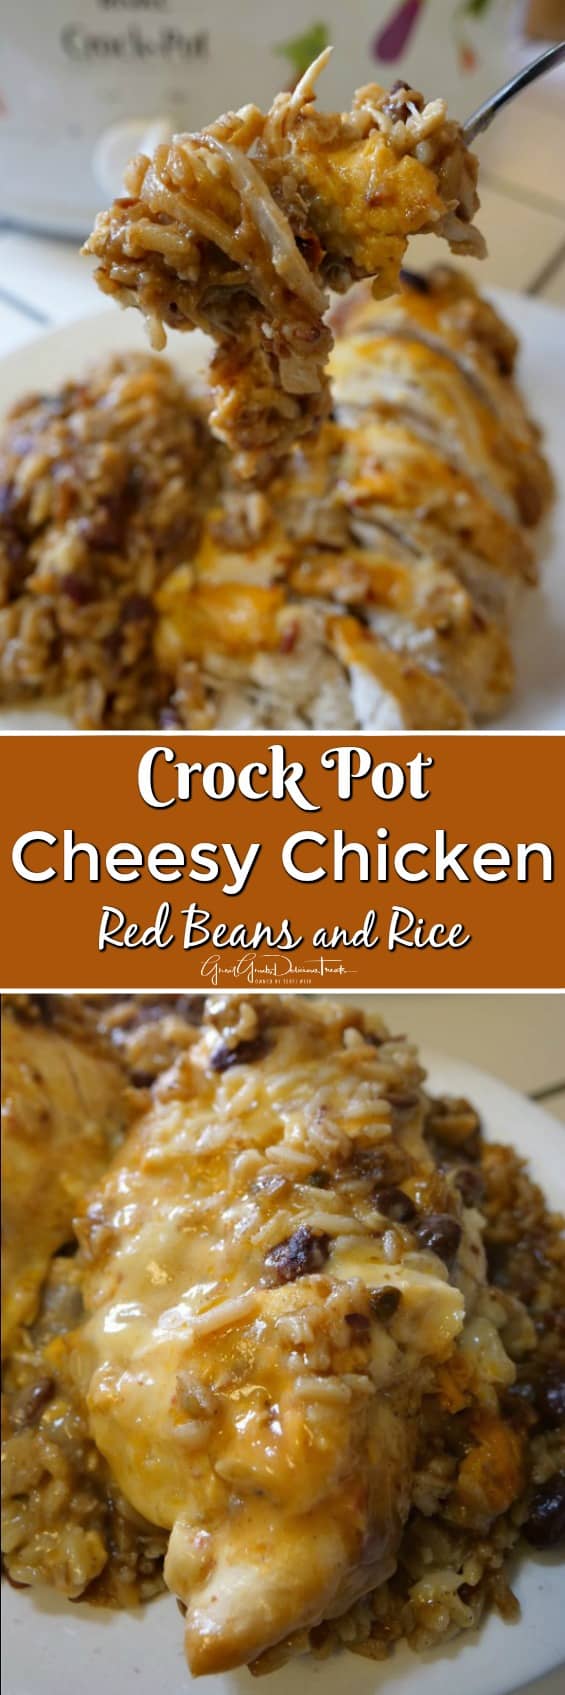 Crock Pot Cheesy Chicken Red Beans and Rice